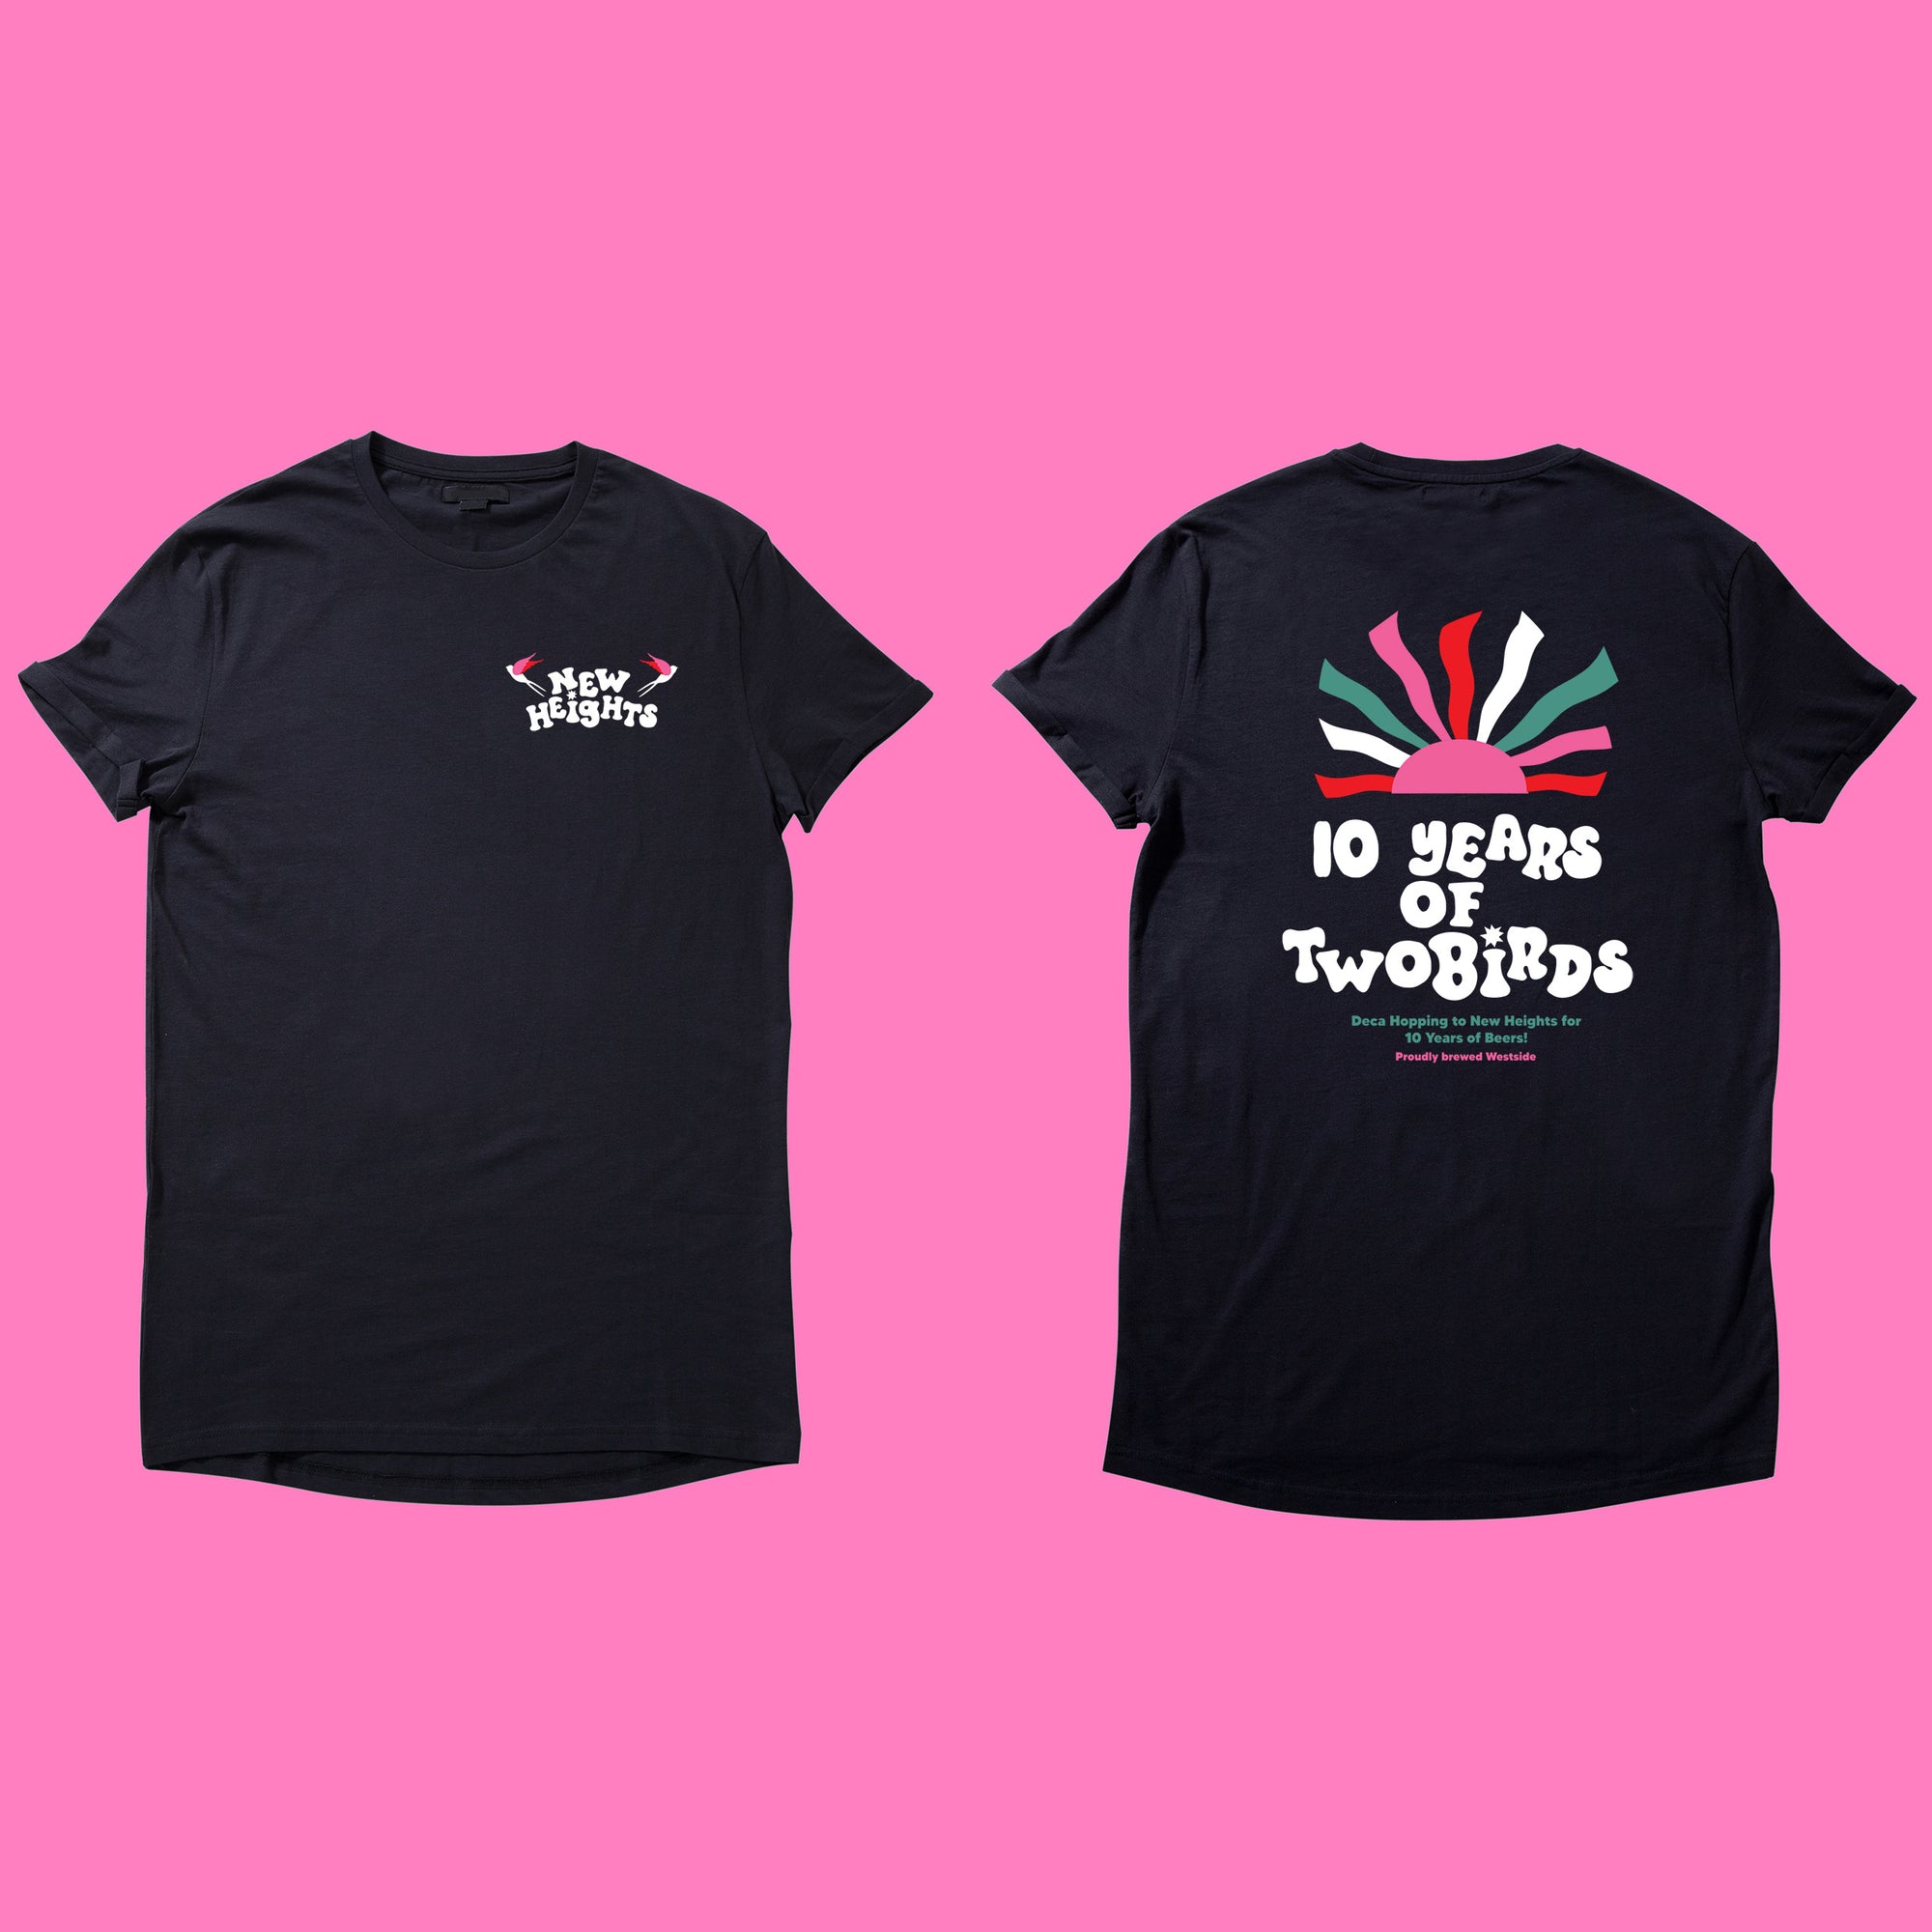 A front and back view of a black tshirt, against a pink background. On the shirt are colourful motifs and designs. 